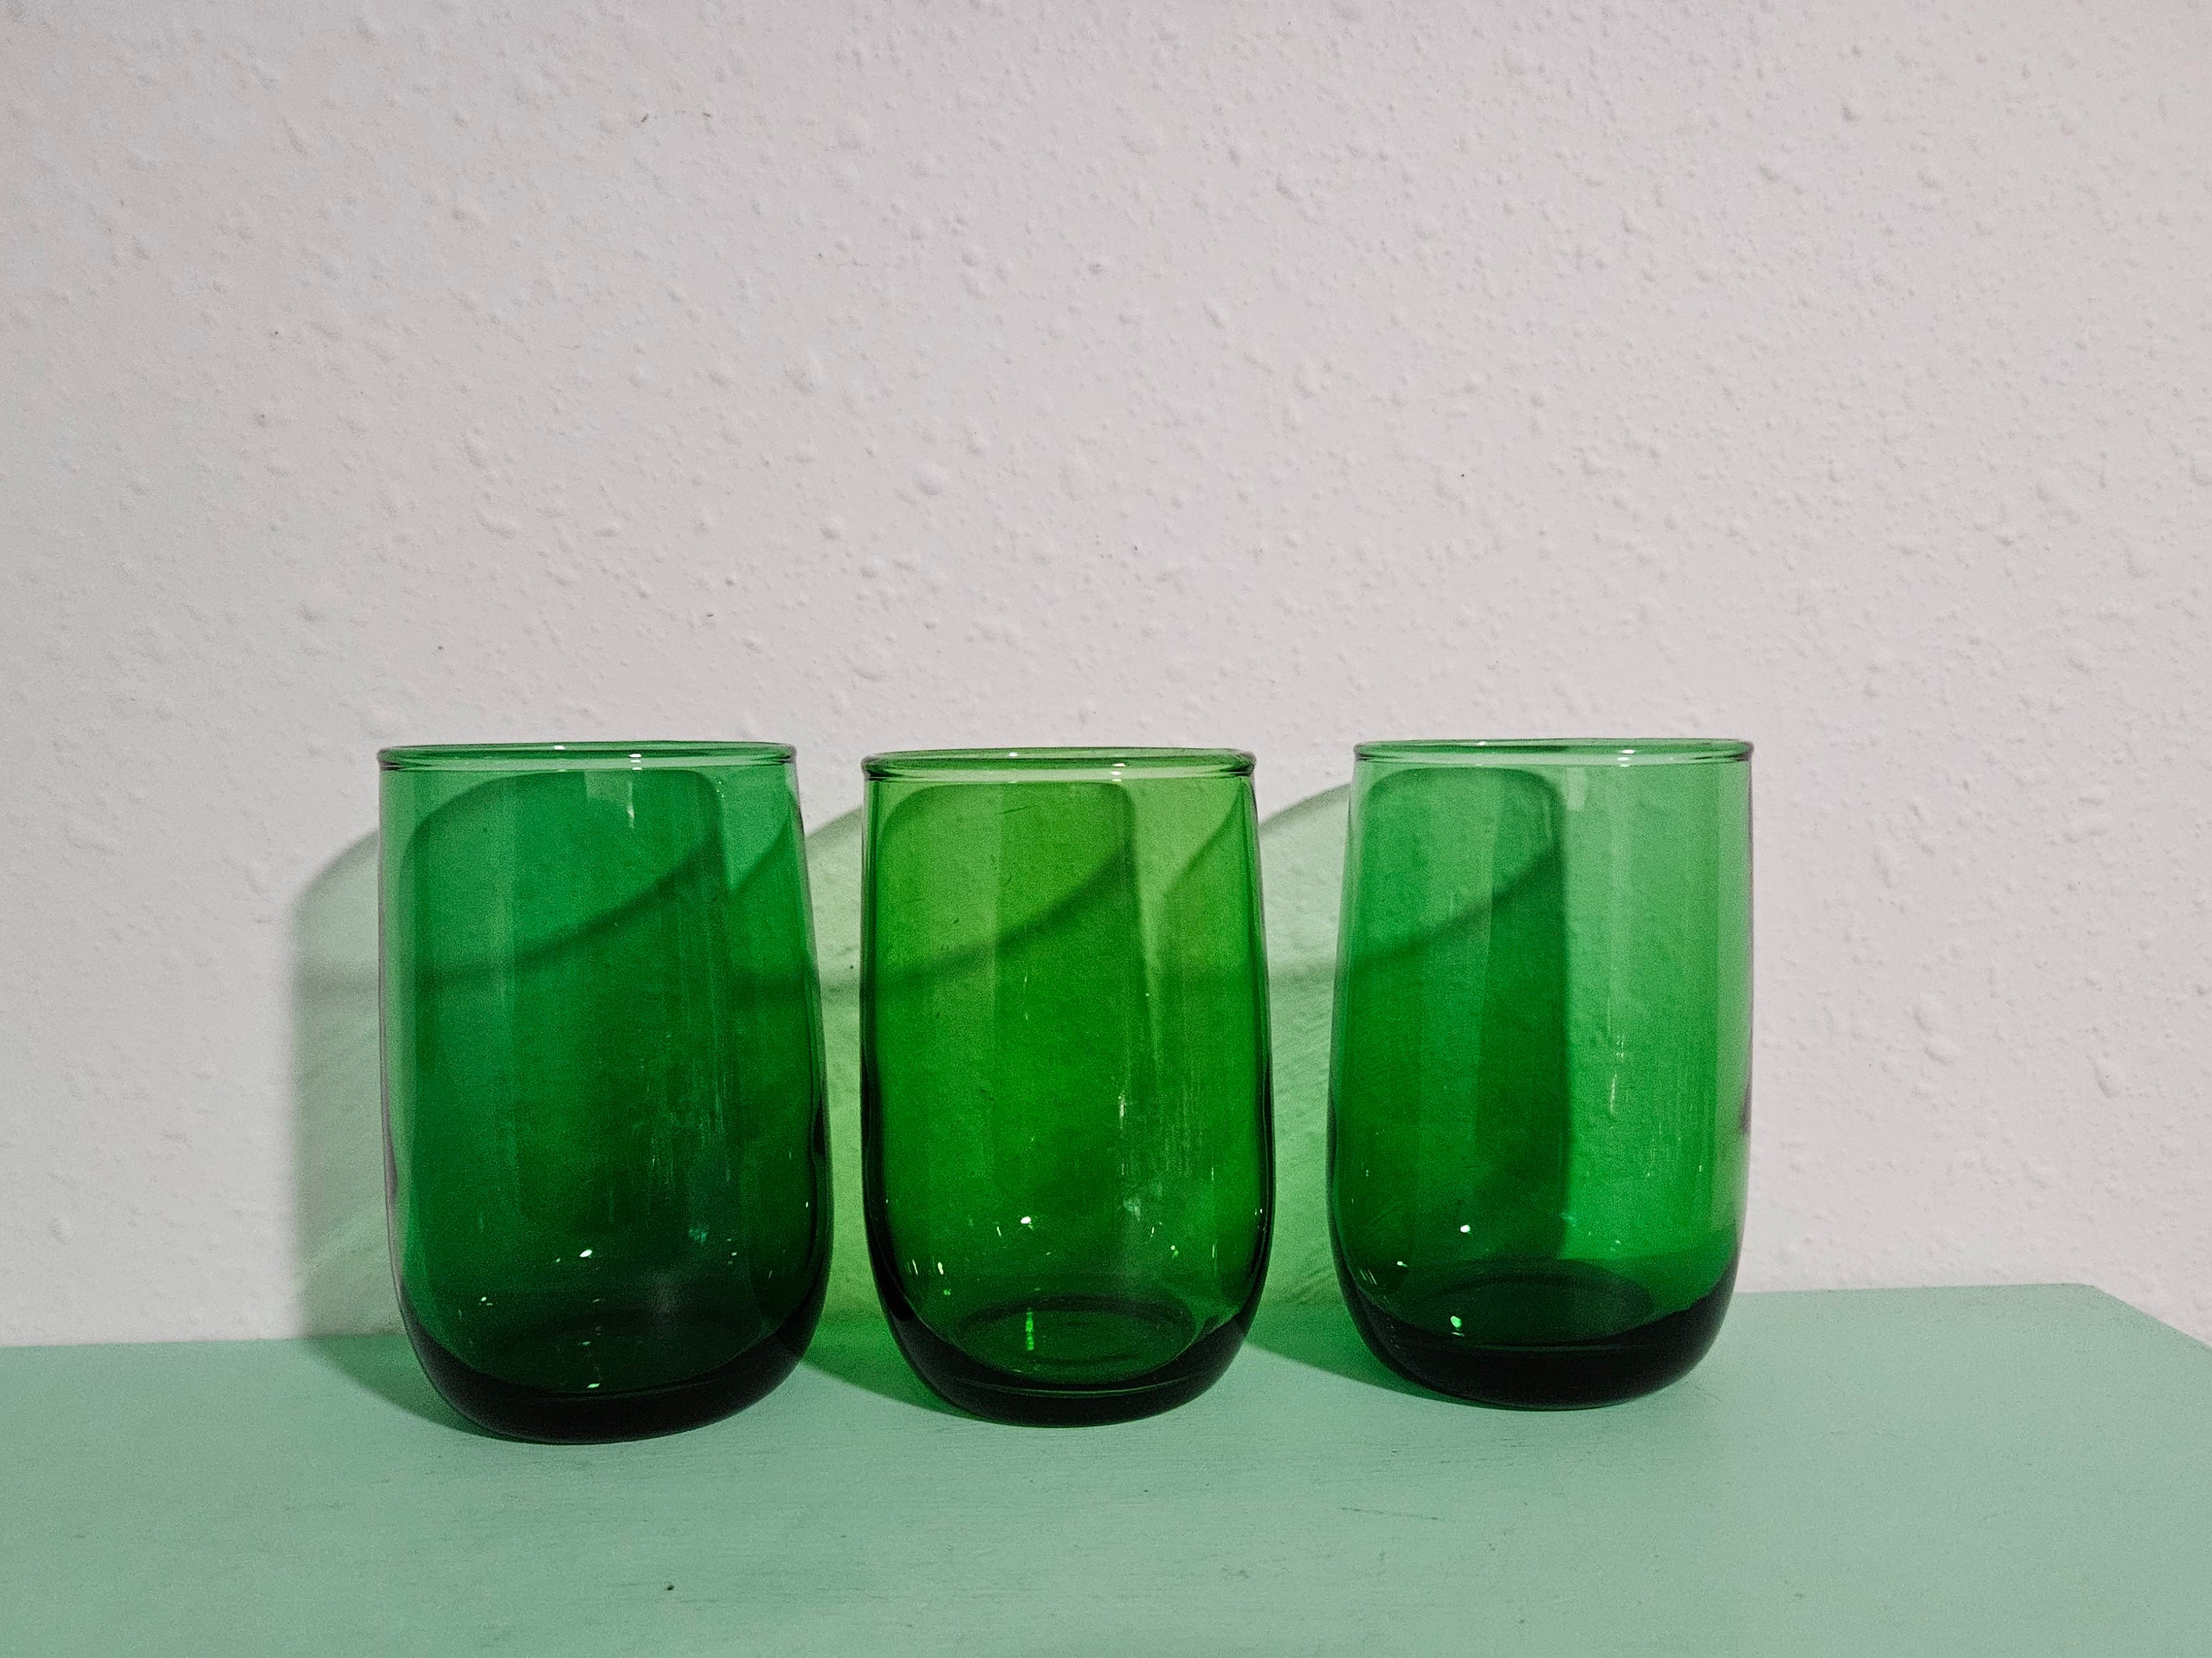 Joeyan Small Water Juice Glass Cups,Vintage Green Colored Drinking  Glasses,Pretty Embossed Kitchen G…See more Joeyan Small Water Juice Glass